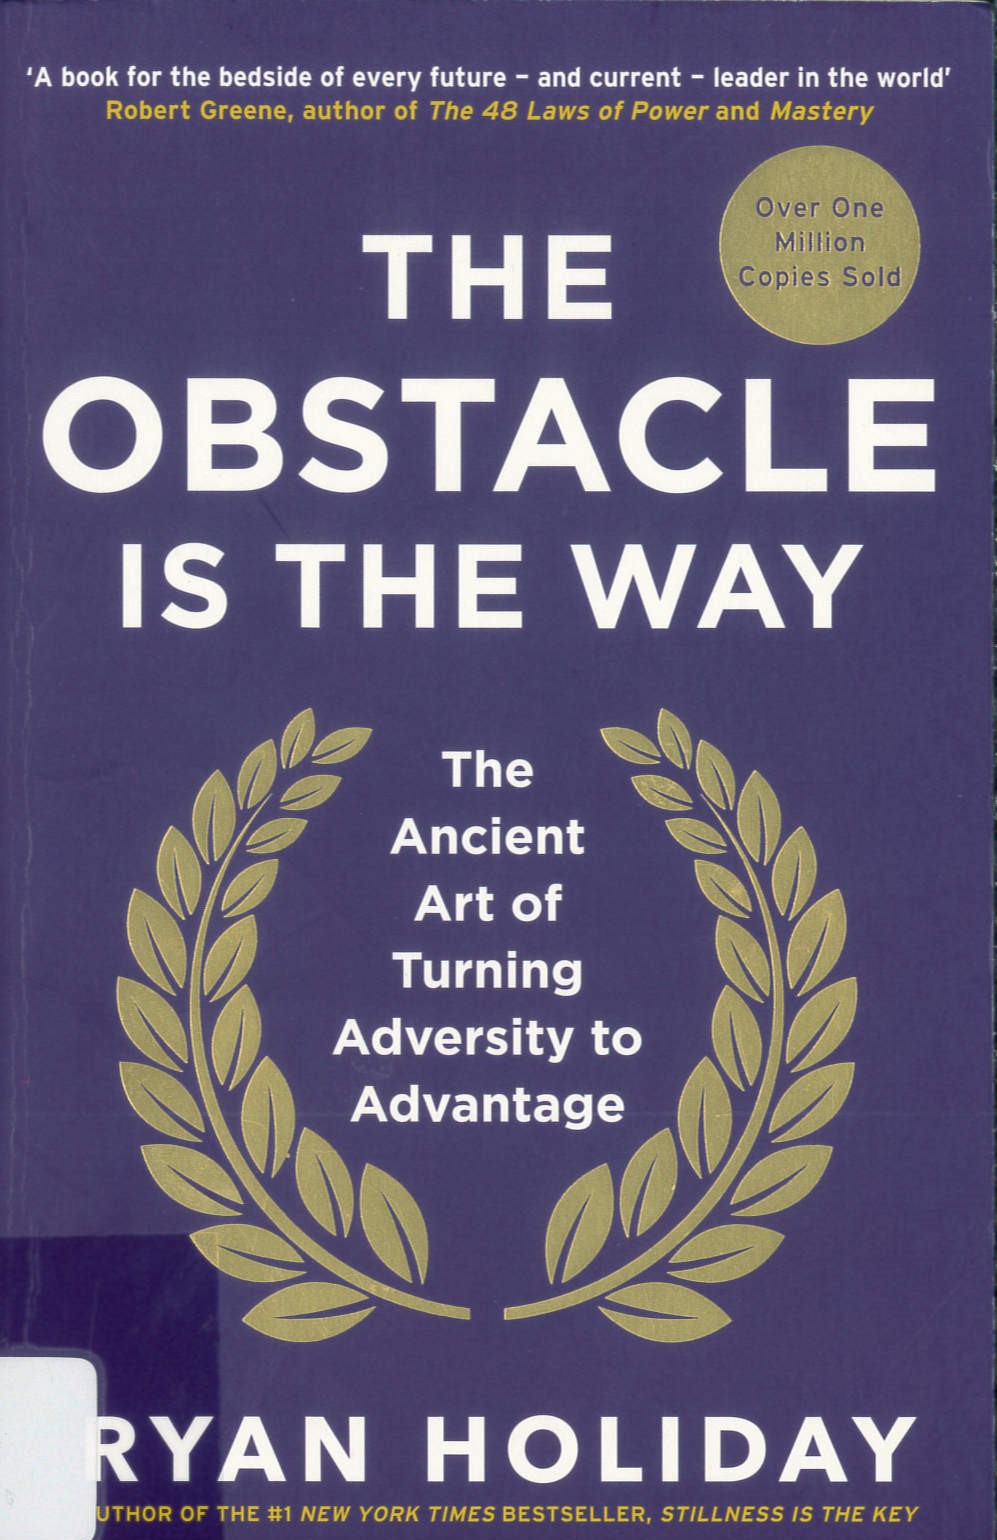 The obstacle is the way : the timeless art of turning trials into triumph /